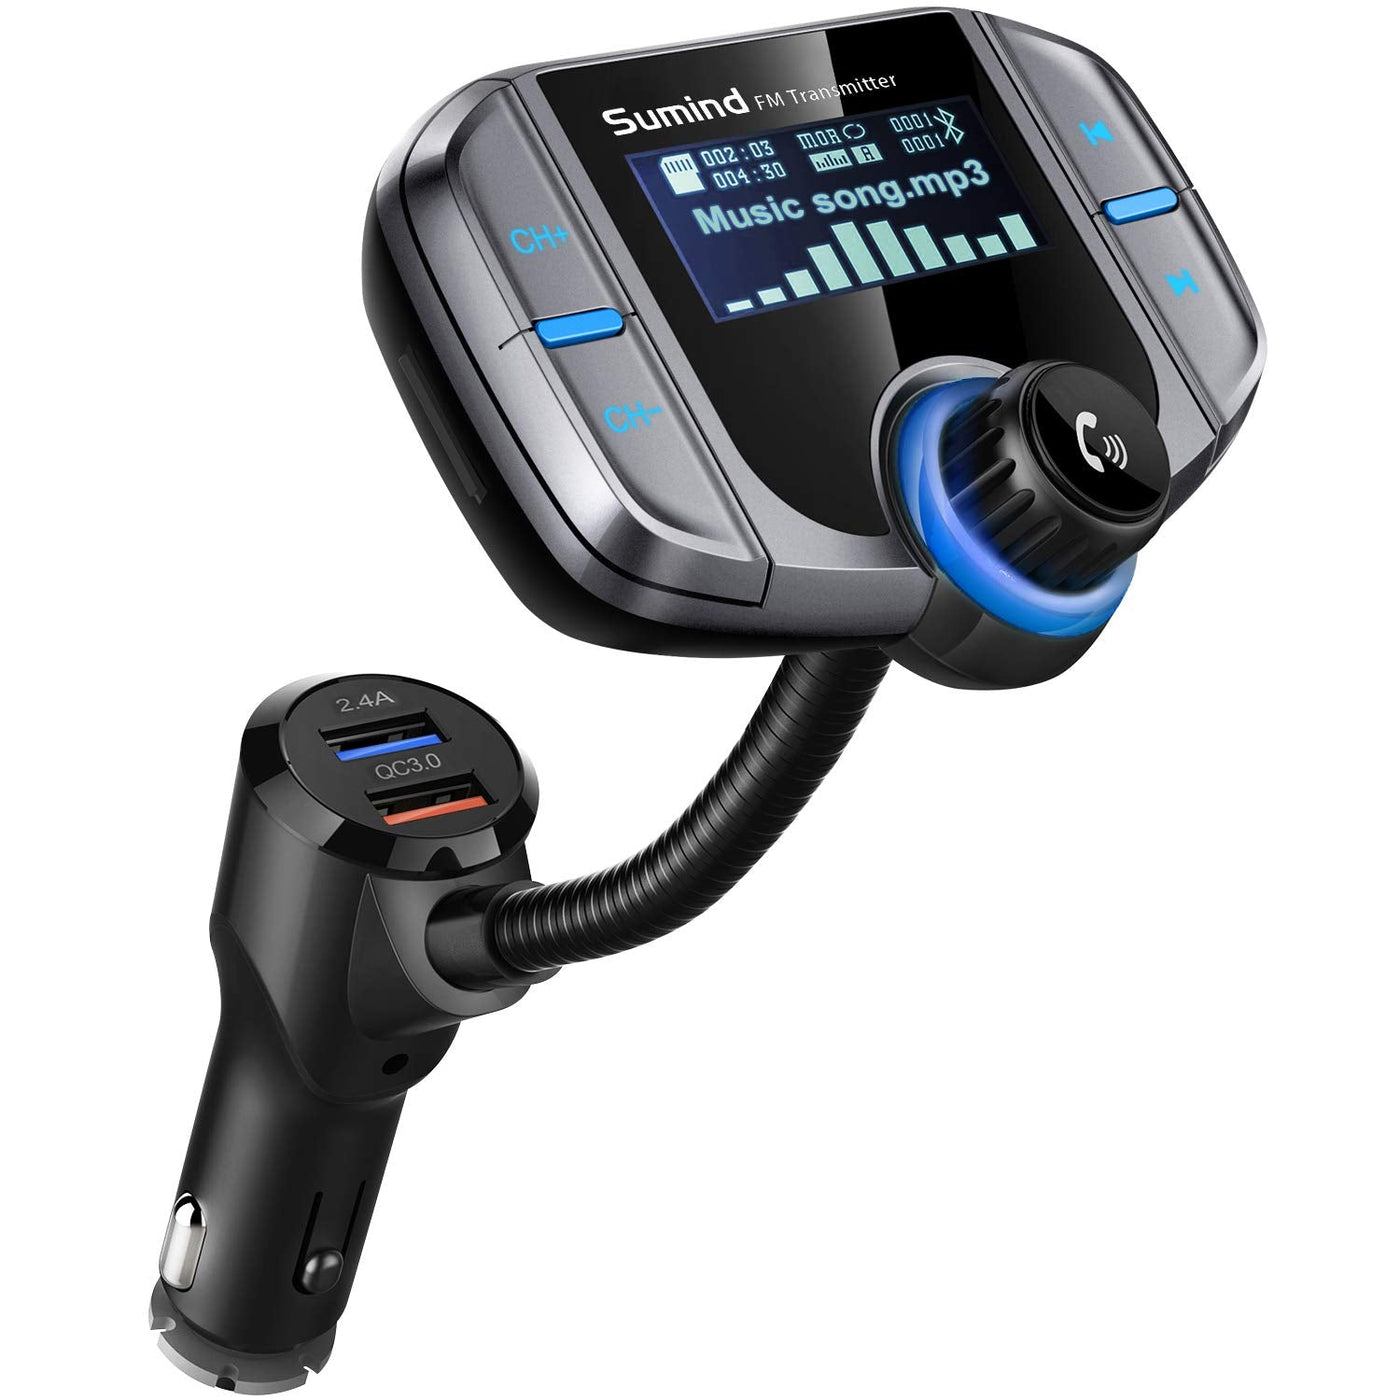 Bluetooth Fm Transmitter, Bluetooth 5.0 Car Radio Adapter Mp3 Player  Wireless Hands-free Kit, Cigarette Lighter Charger With Dual Usb Ports  5v/2.4a